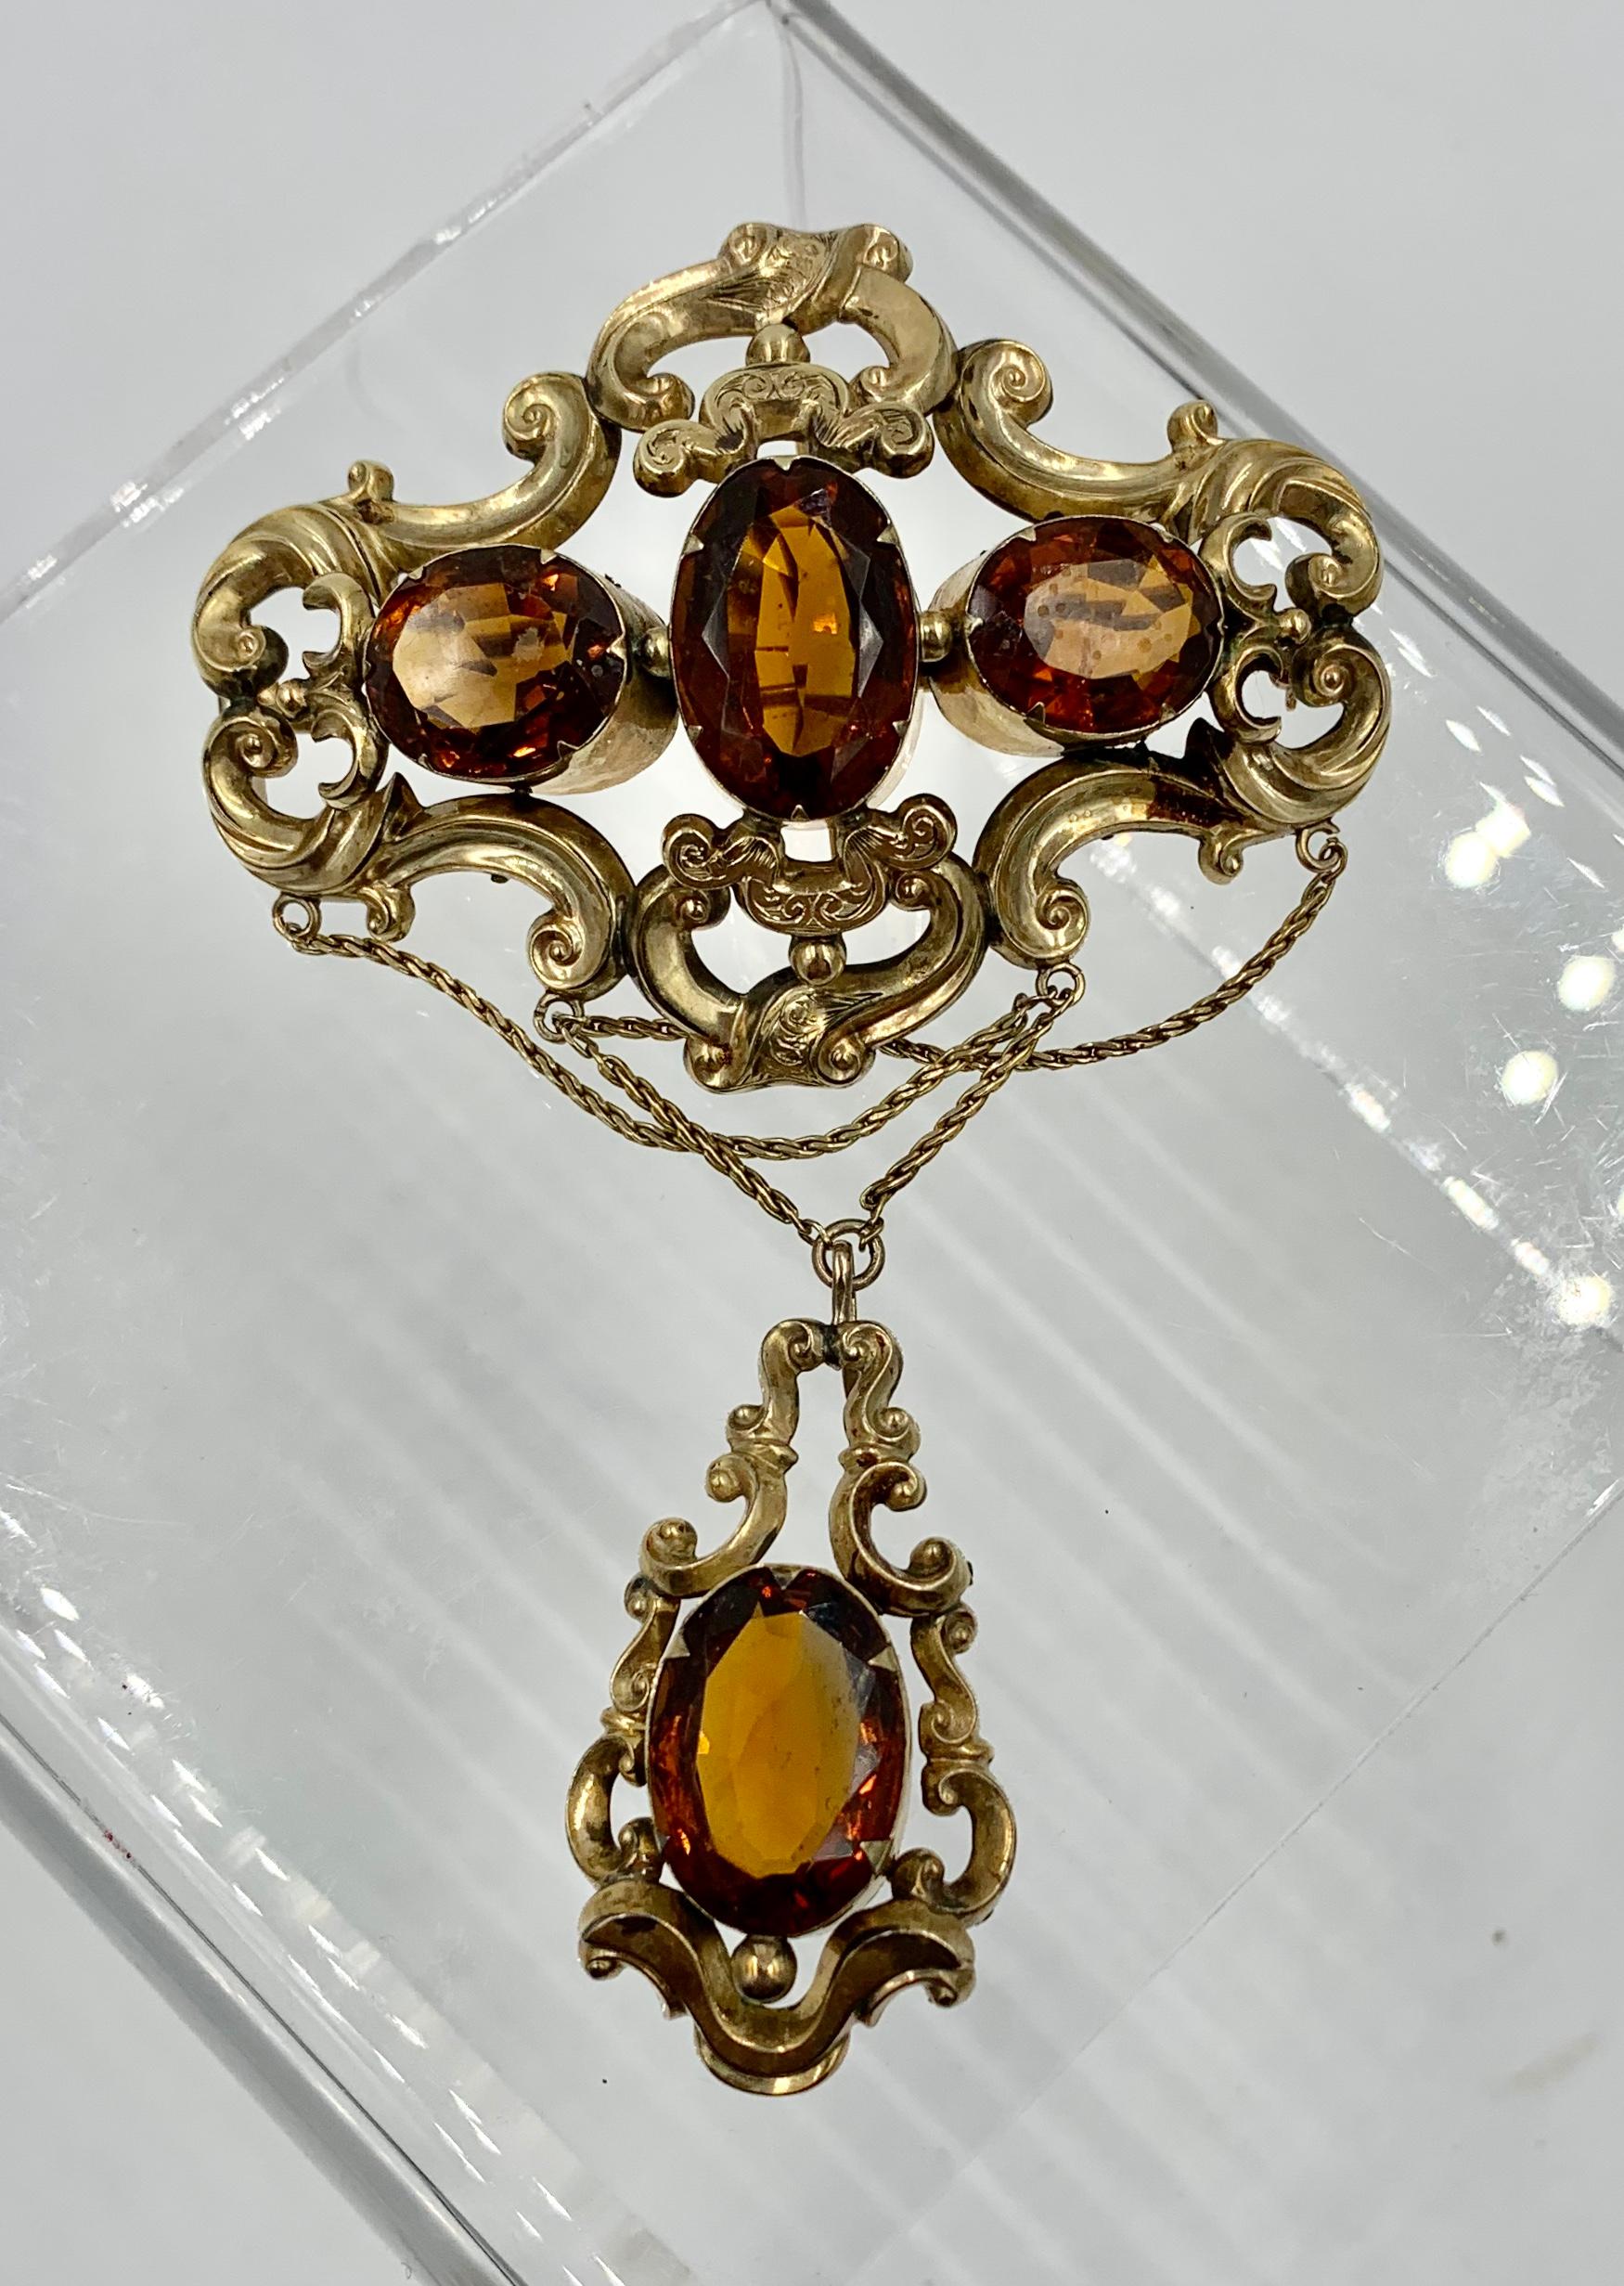 Oval Cut Victorian 30 Carat Citrine Swag Pendant Brooch Gold Monumental For Sale